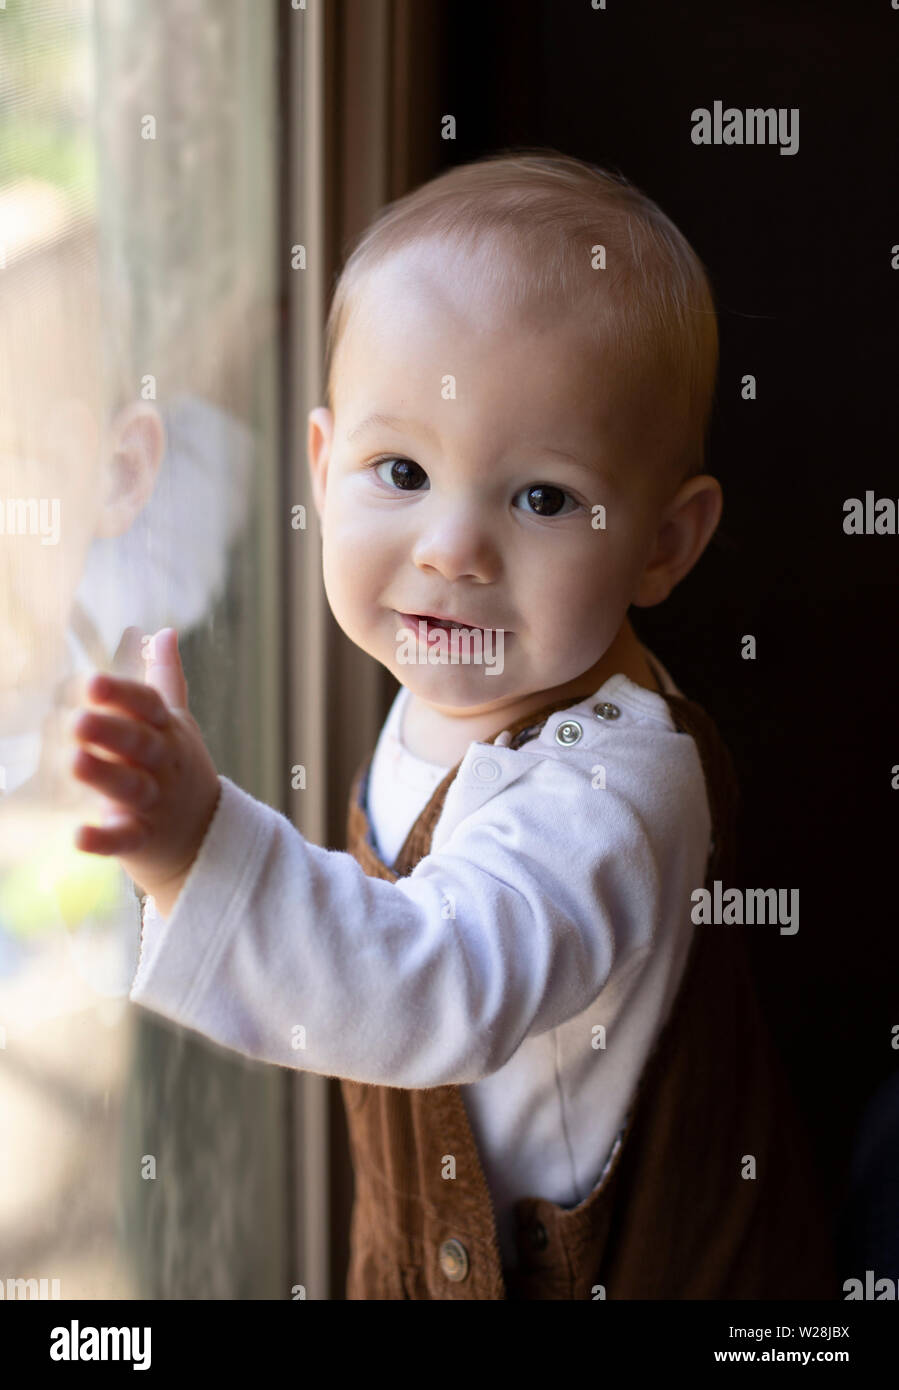 Toddler/Baby in overalls standing next to window, looking at camera Stock Photo